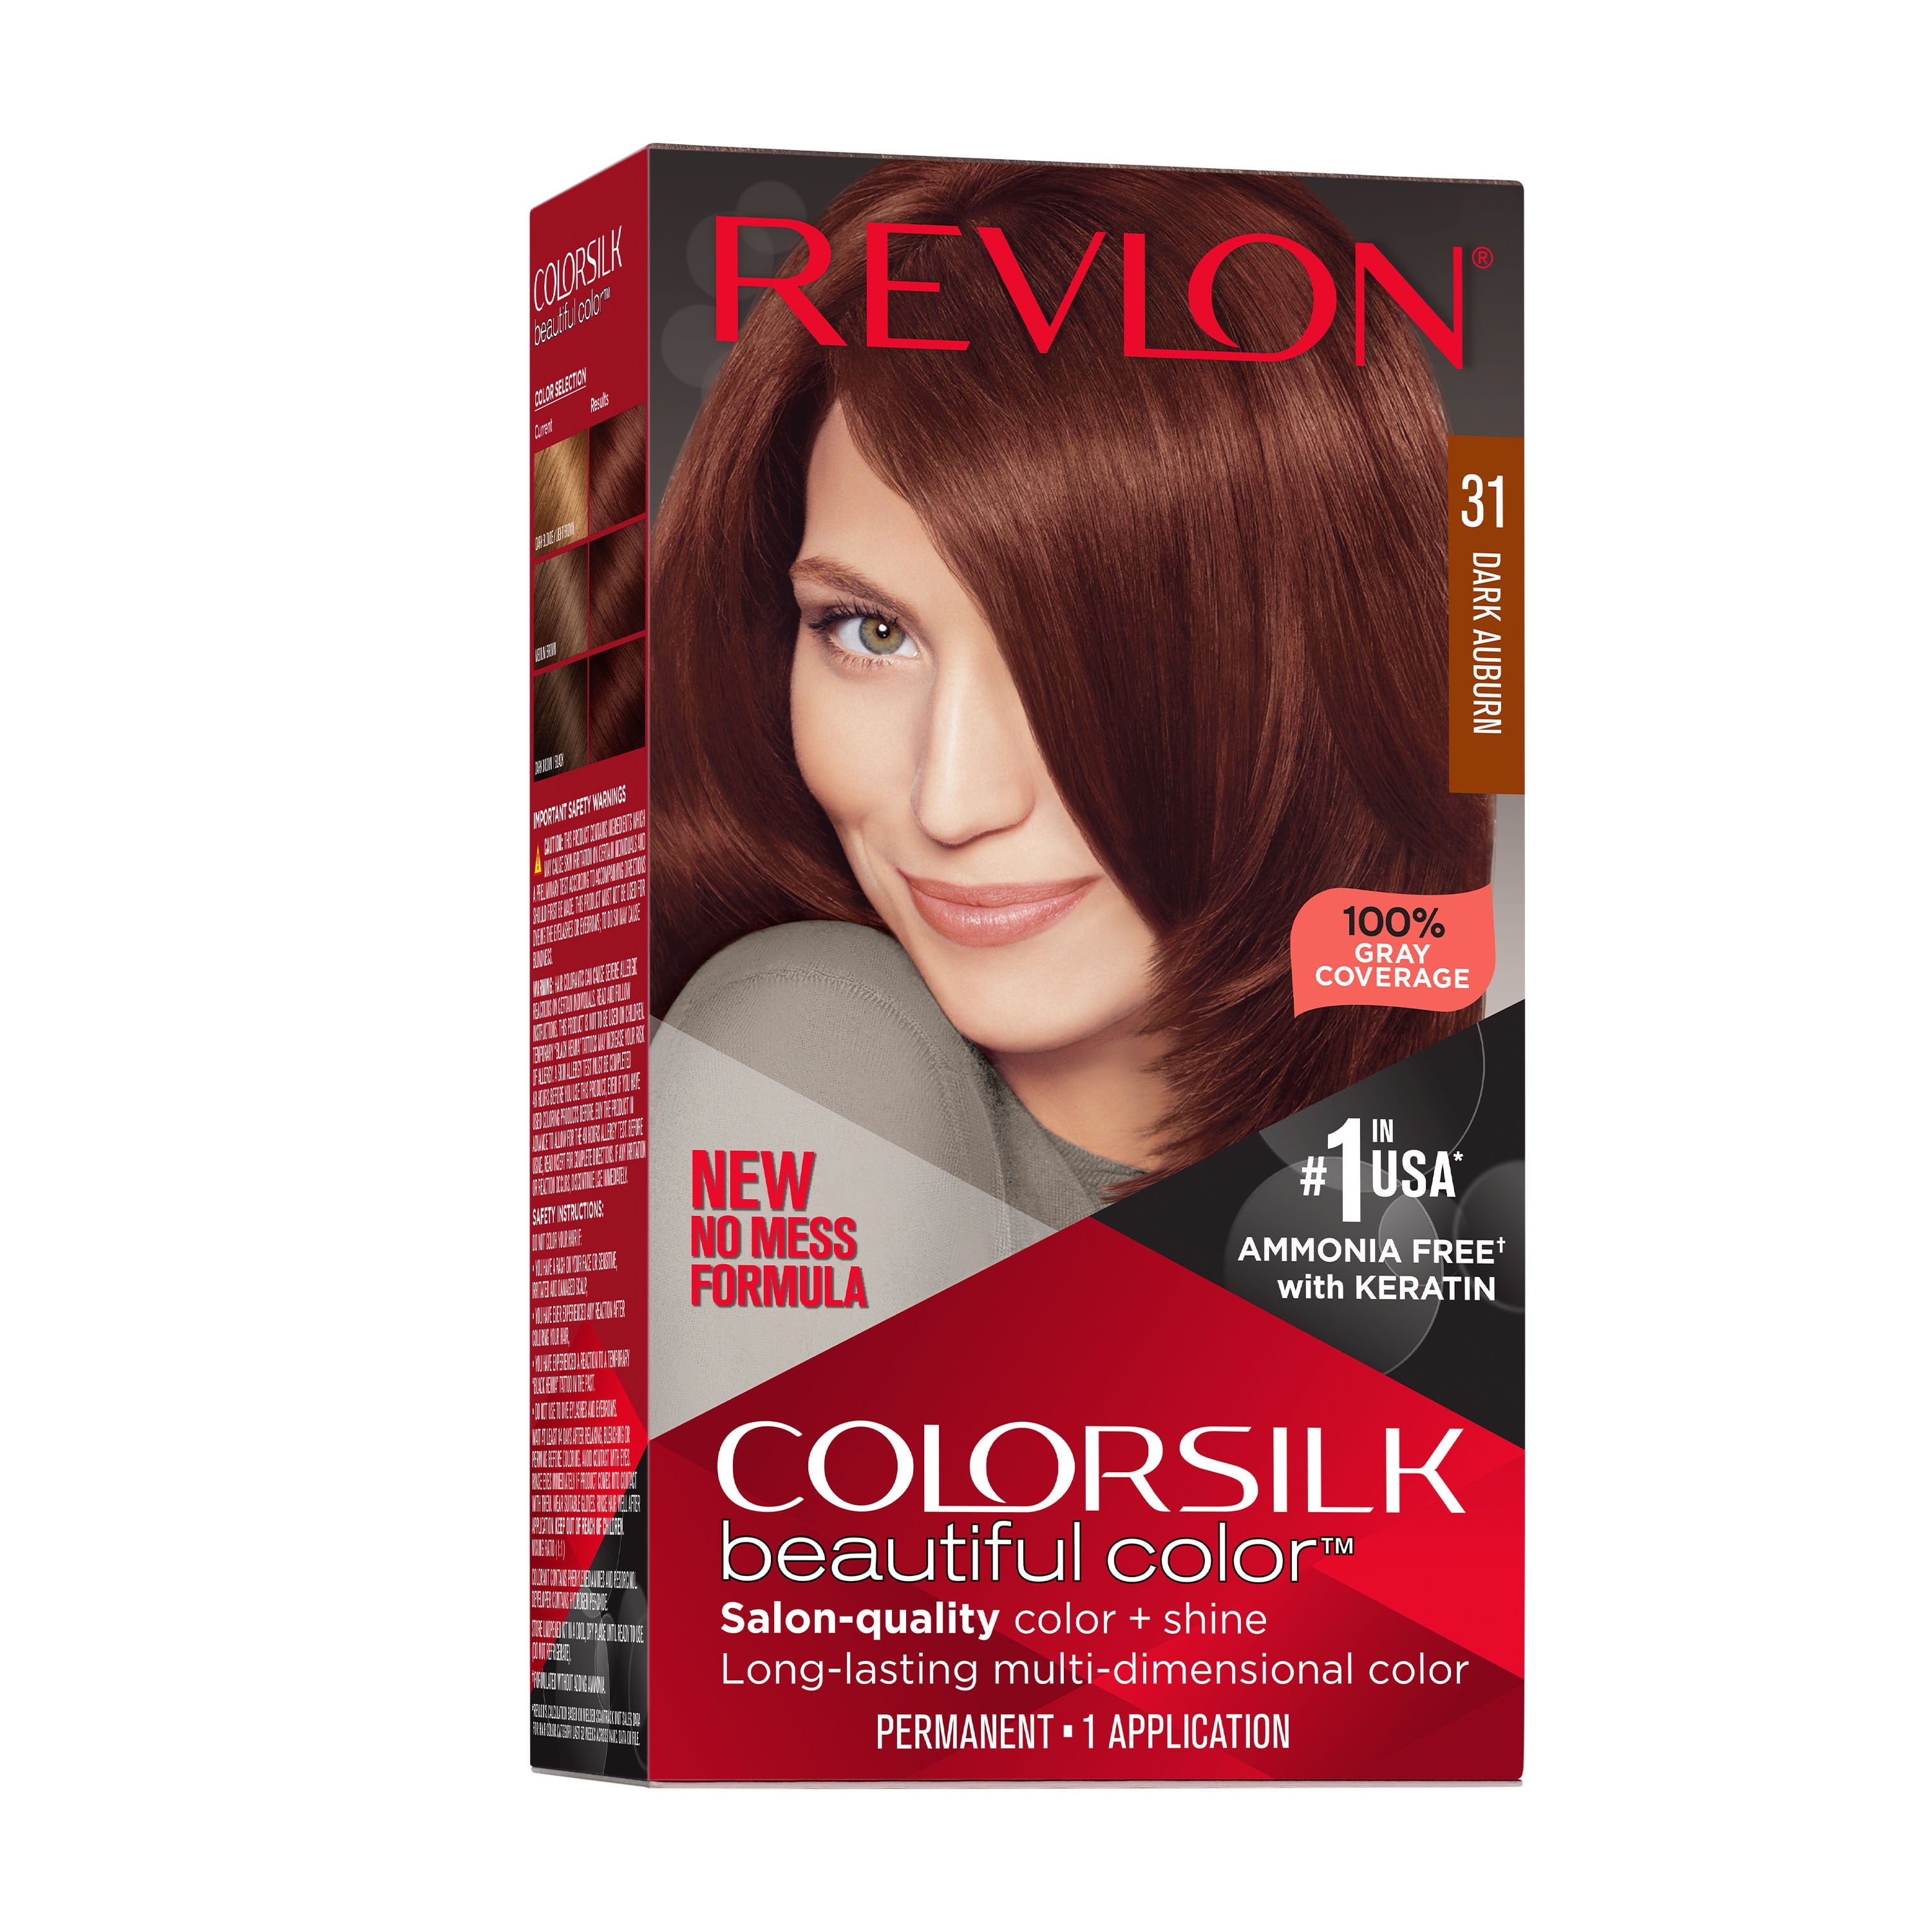 Revlon Colorsilk Beautiful Color Permanent Hair Color, Long-Lasting High-Definition Color, Shine & Silky Softness with 100% Gray Coverage, Ammonia Free